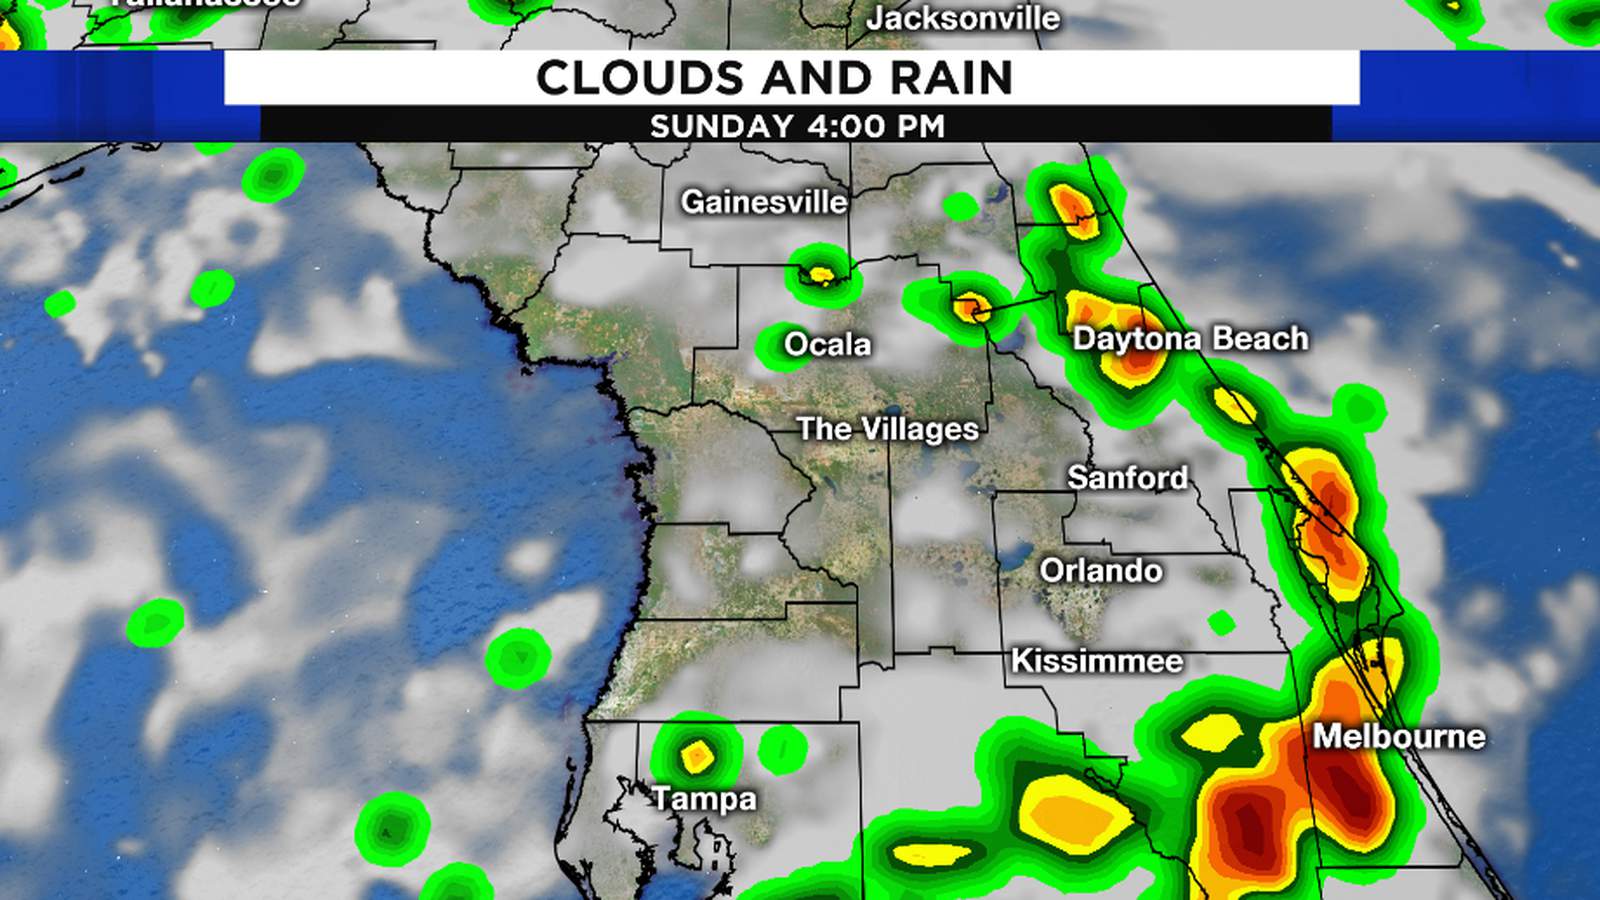 LIVE RADAR Strong storms possible across Central Florida to close out